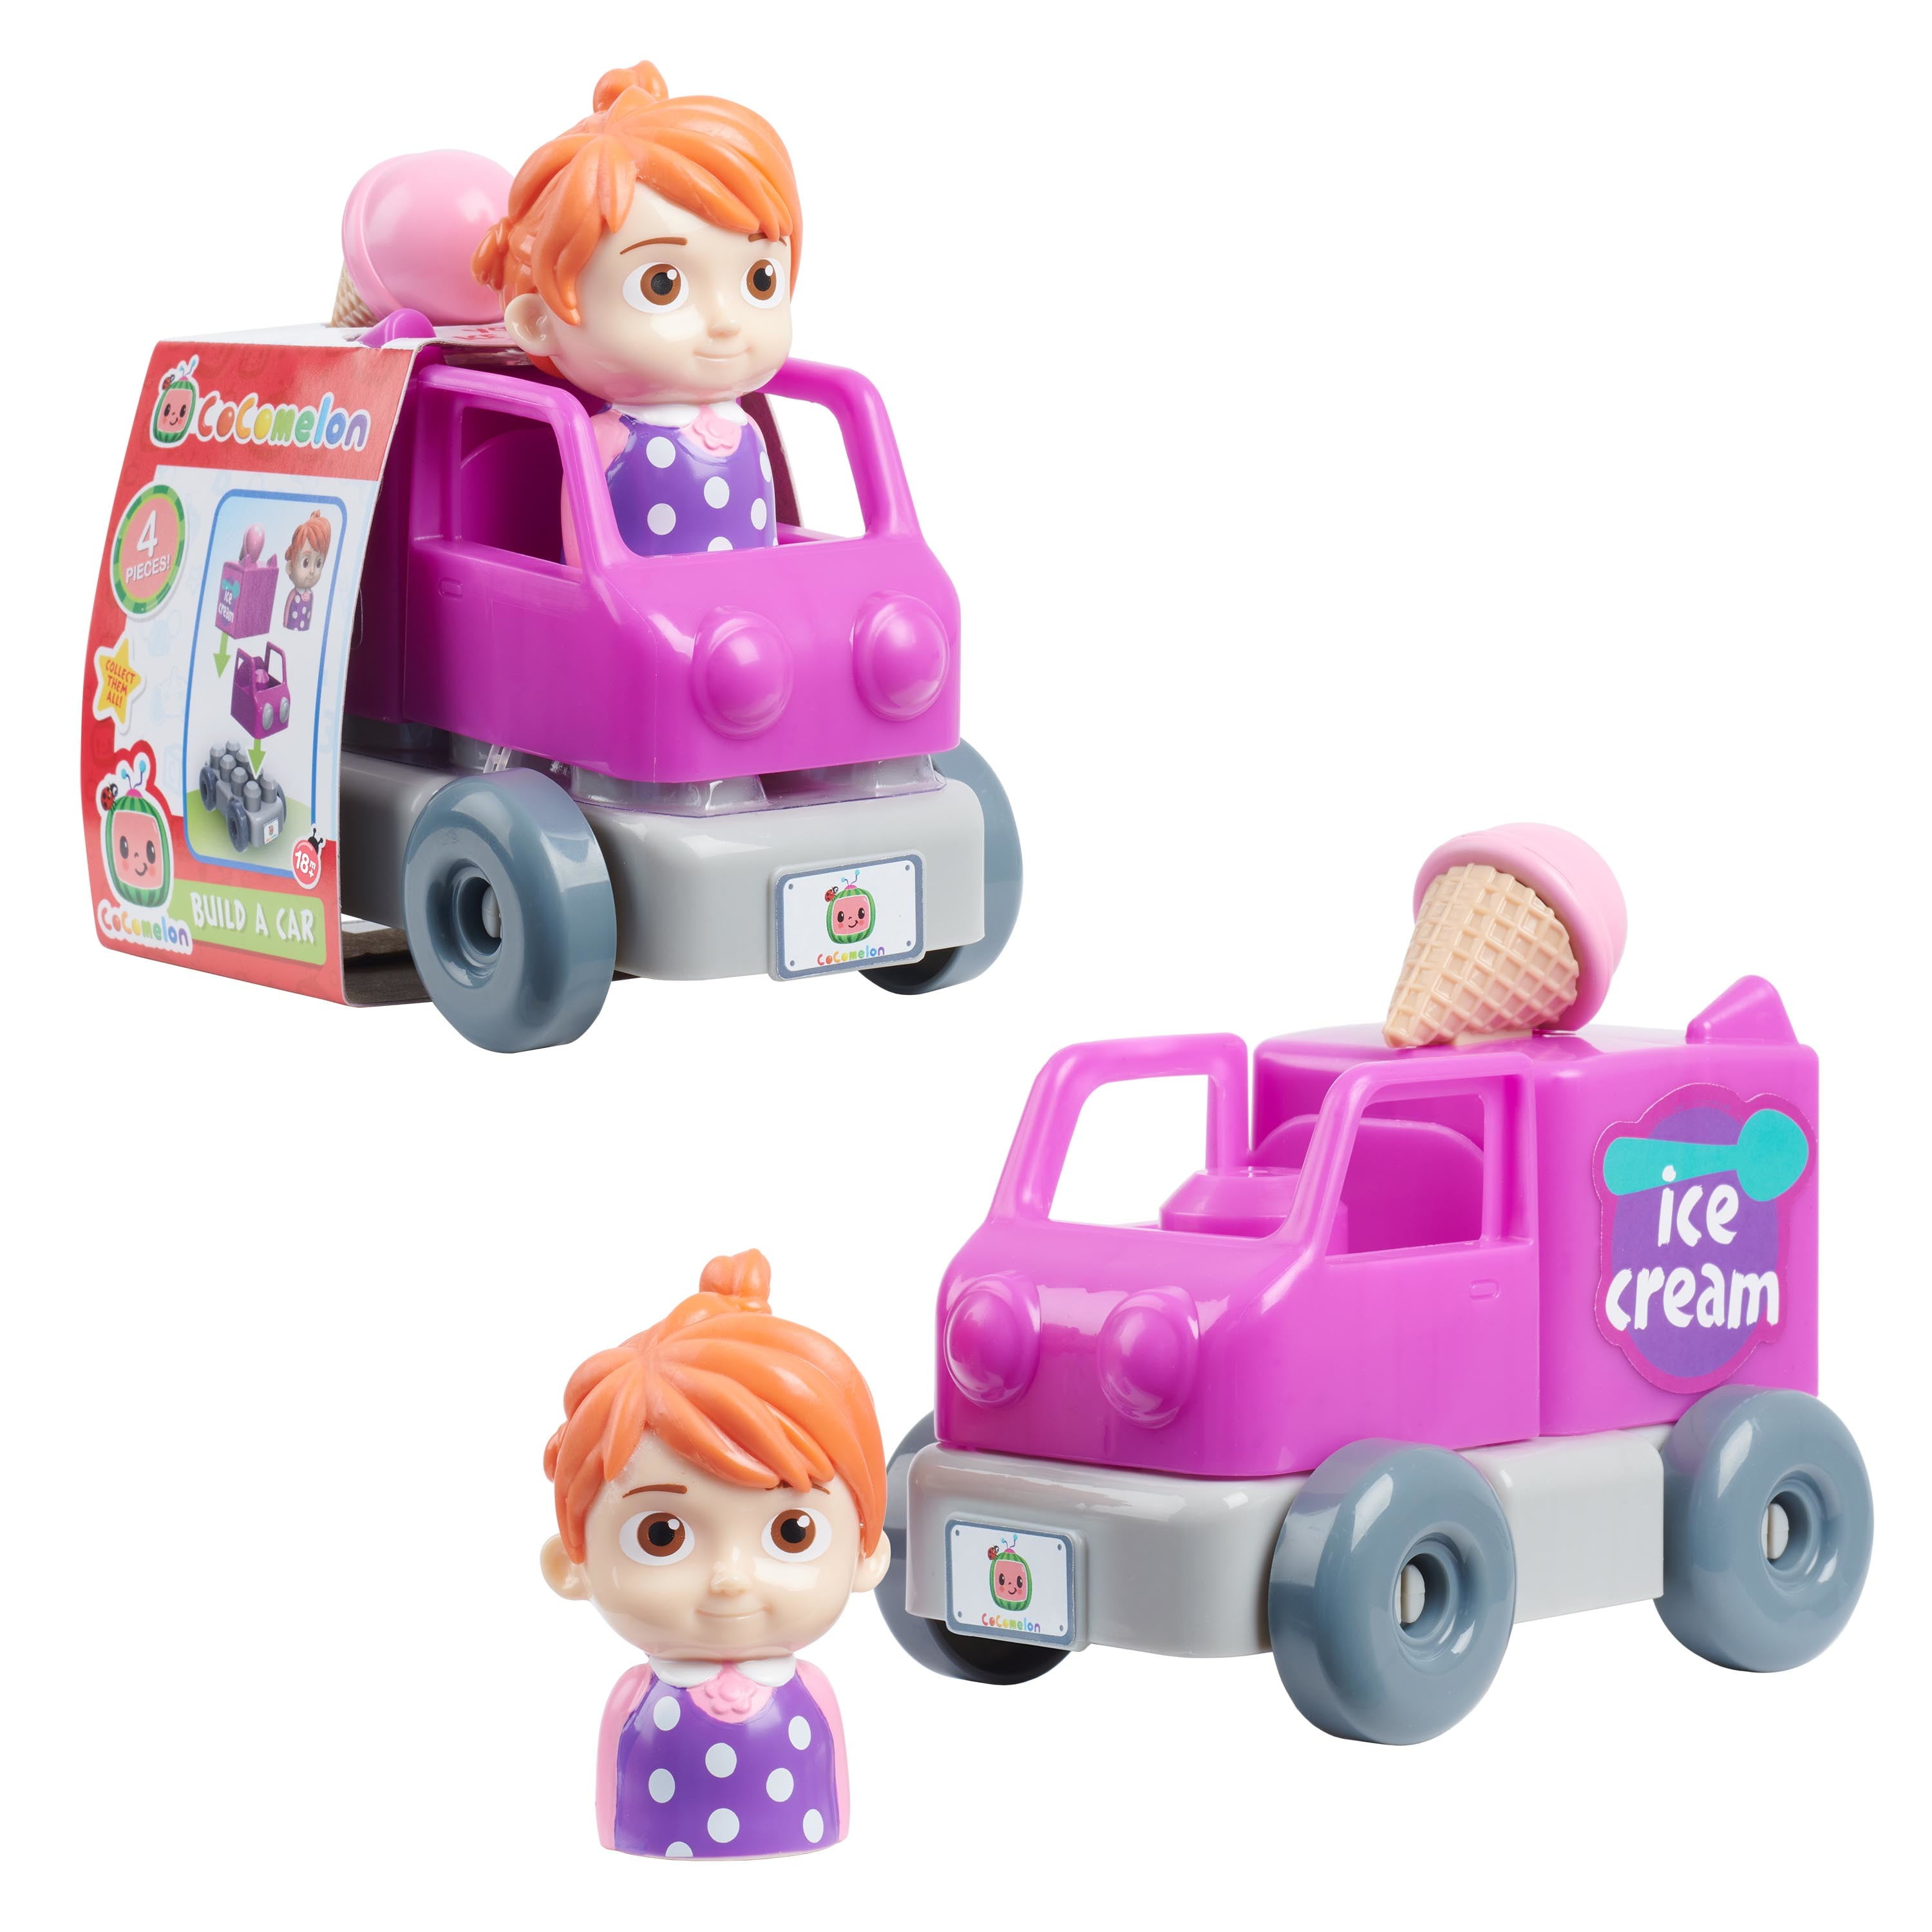 Little People Mail Truck Letters Play Set Pretend Girl Boy Kids Toddler New 